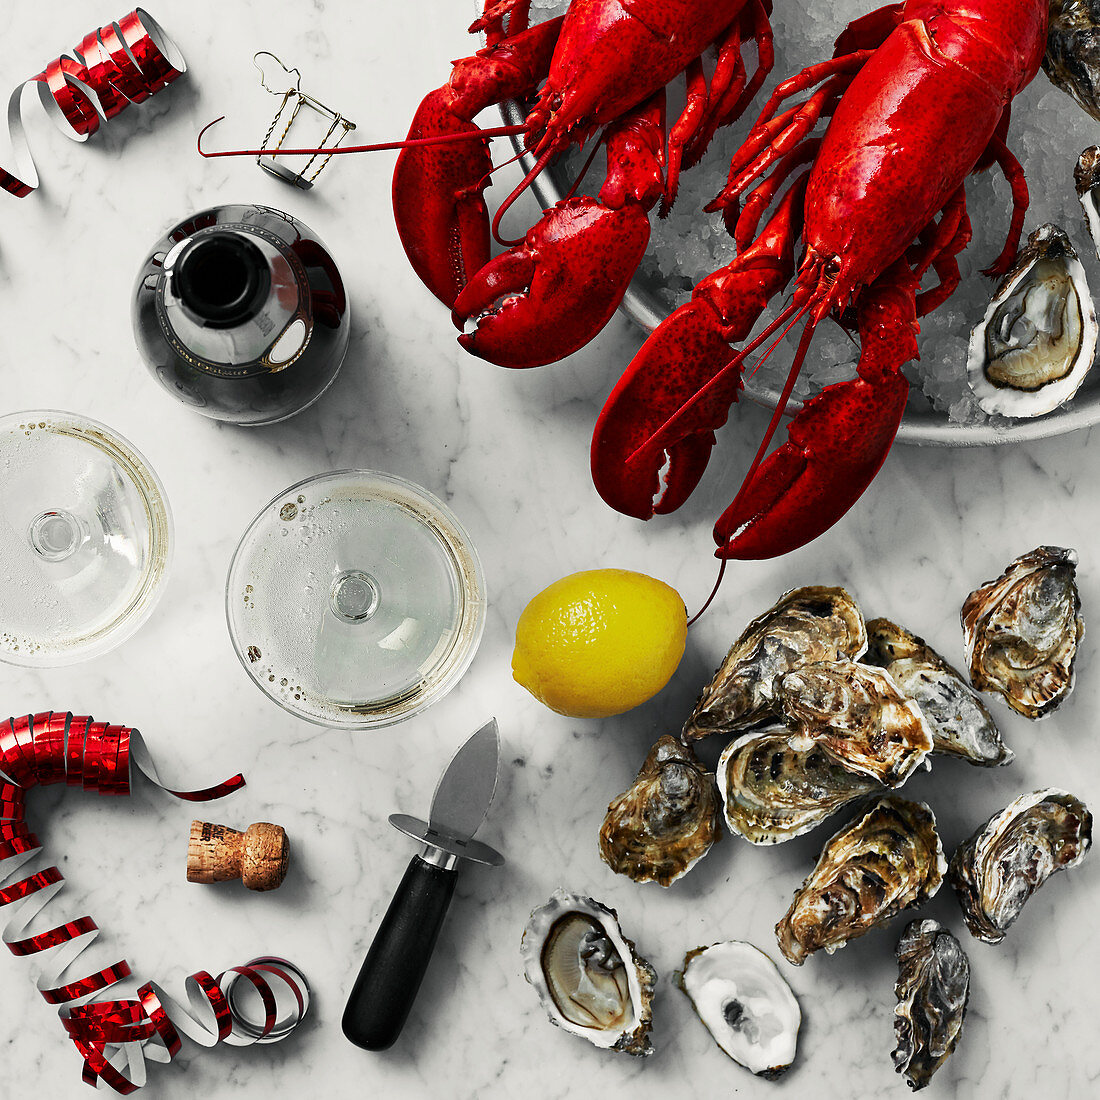 Lobsters on ice, fresh oysters, and sparkling wine for a party